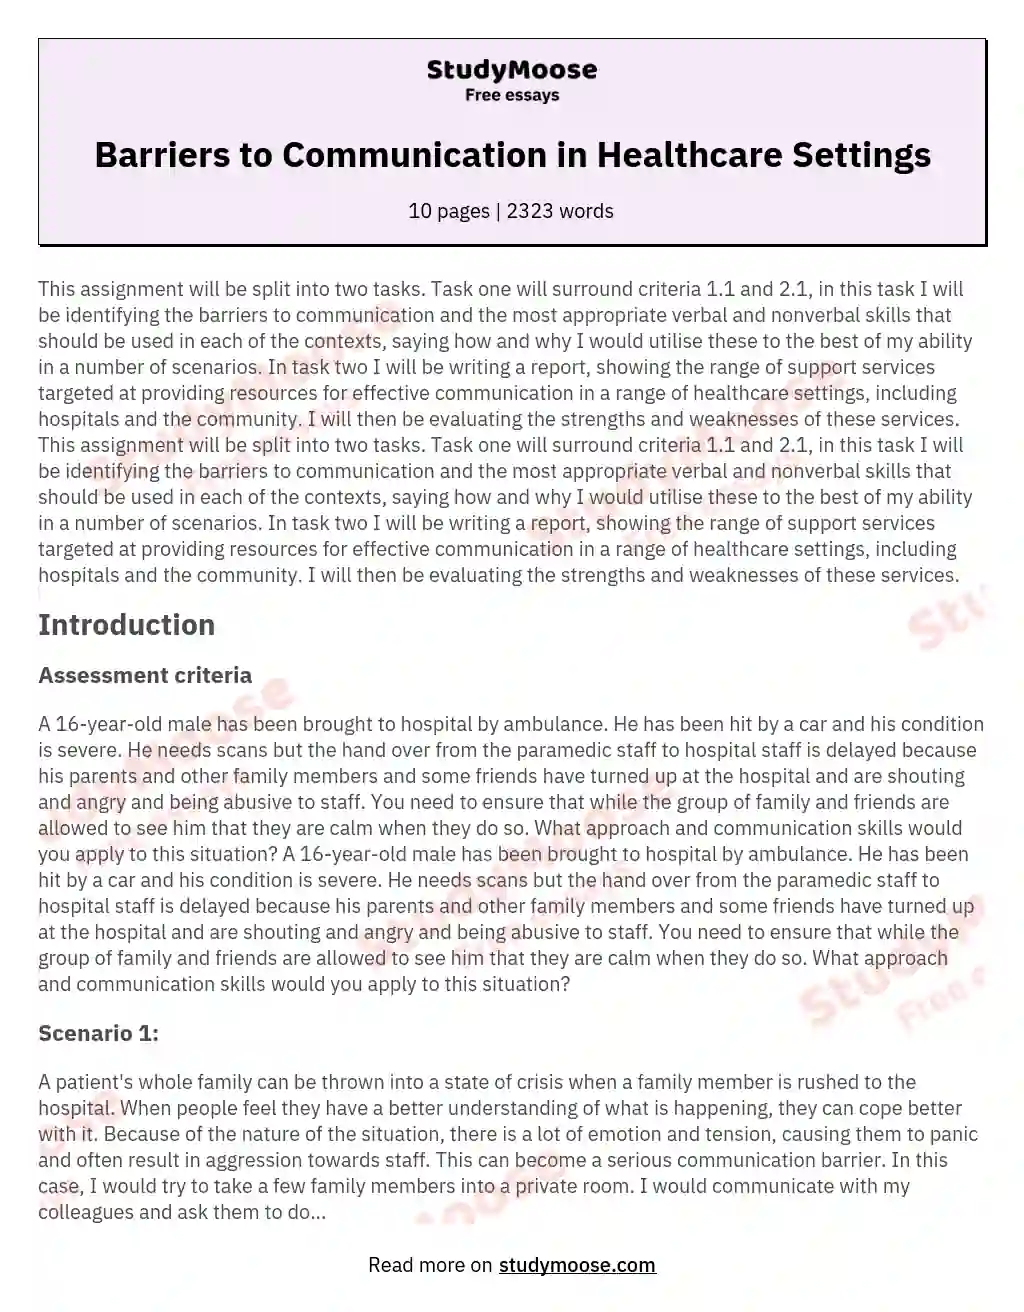 Barriers to Communication in Healthcare Settings essay